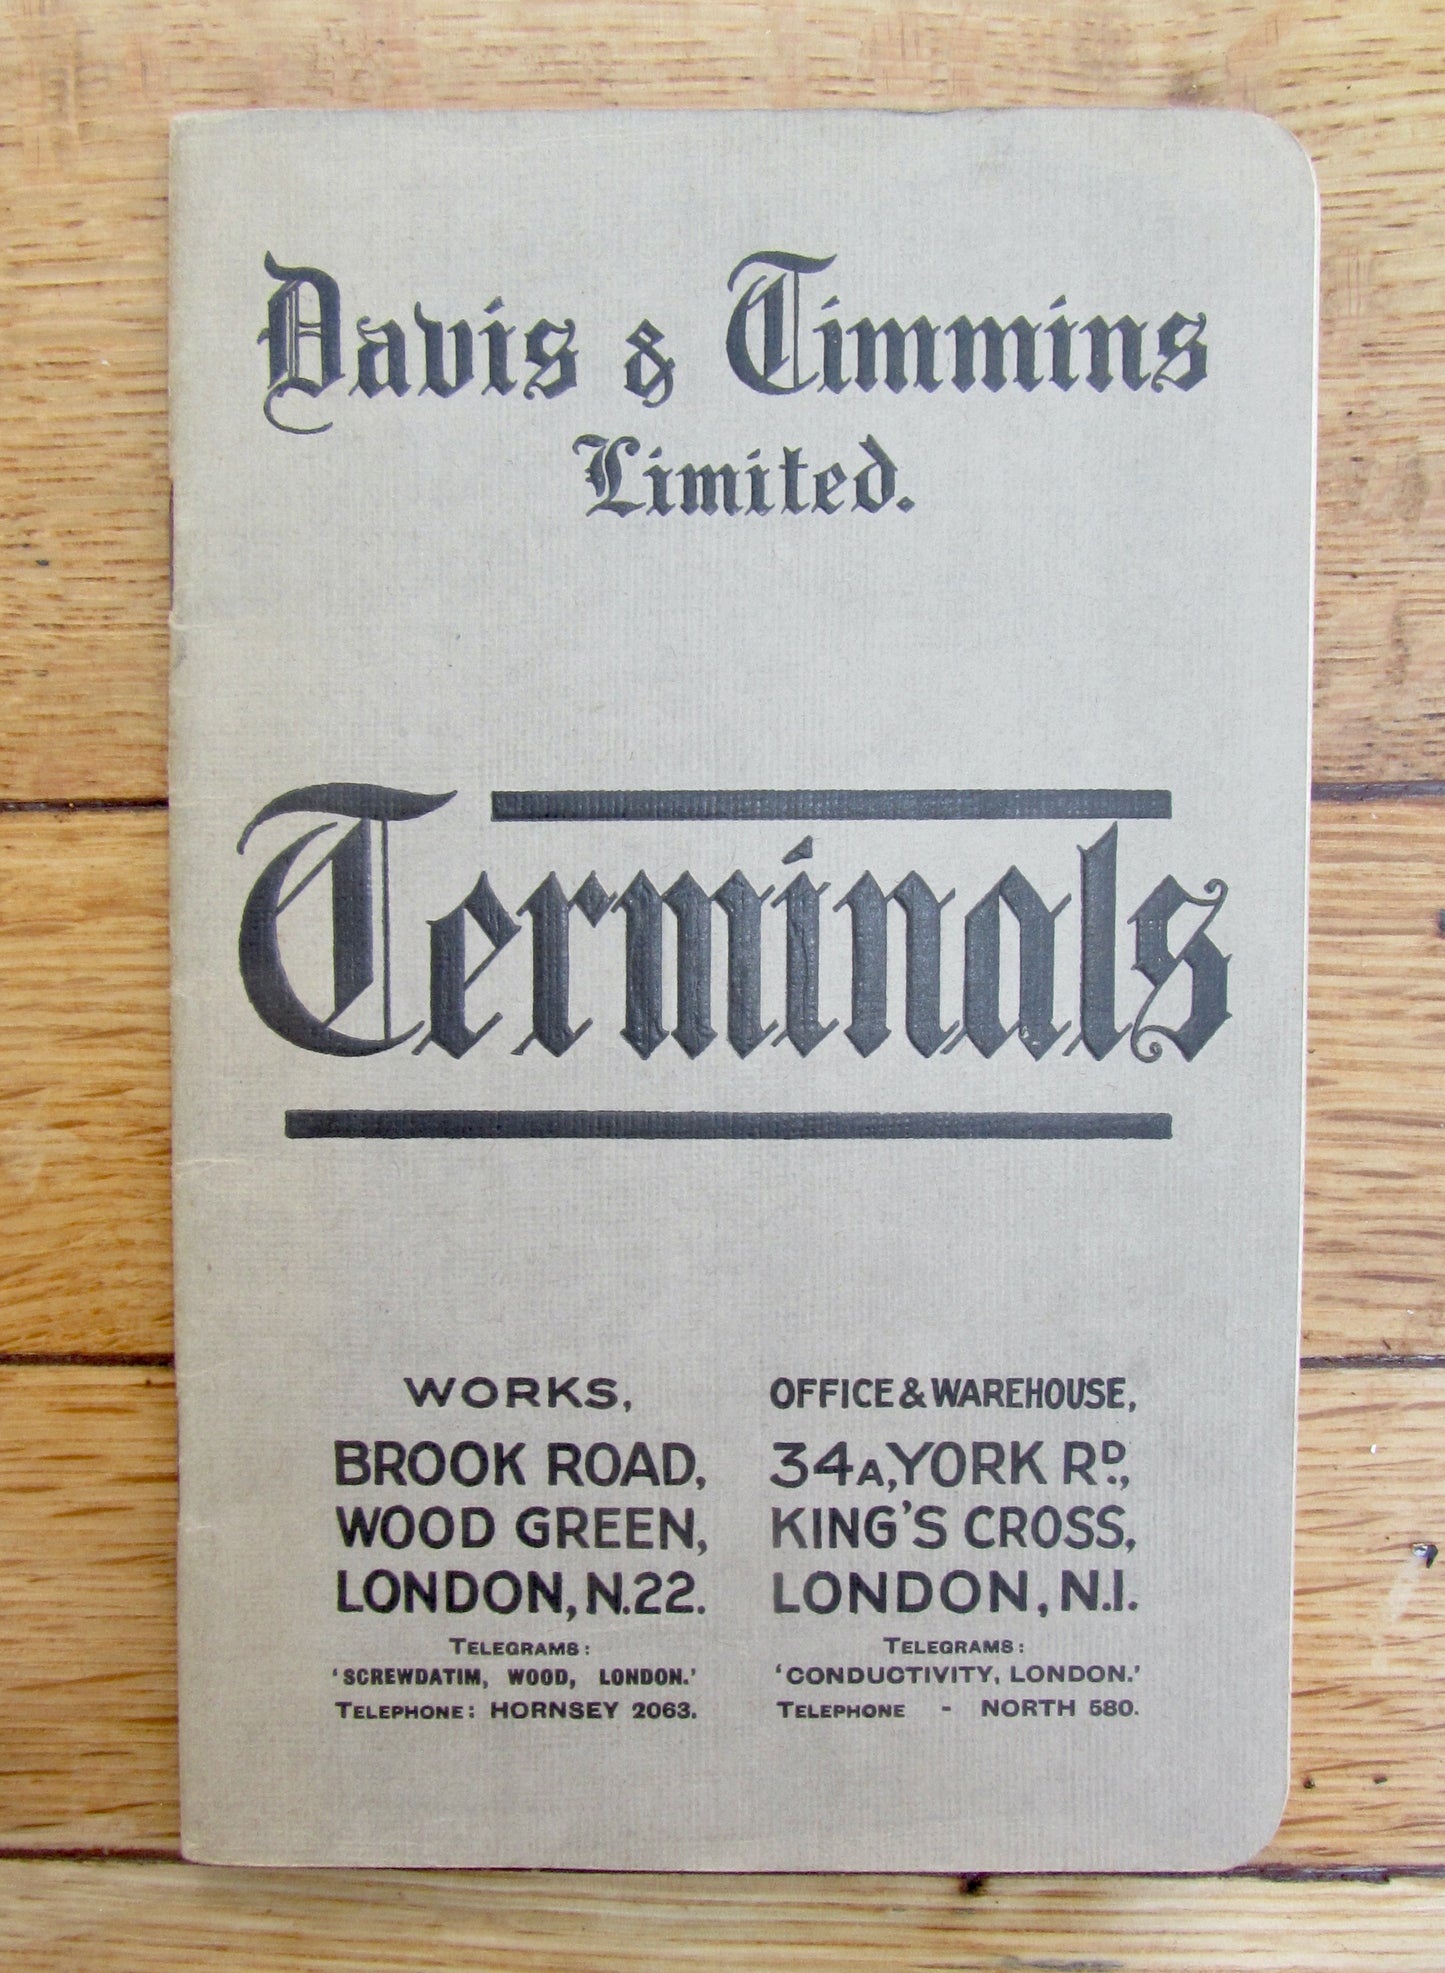 1930s Terminals Catalogue By Davis & Timmins Limited